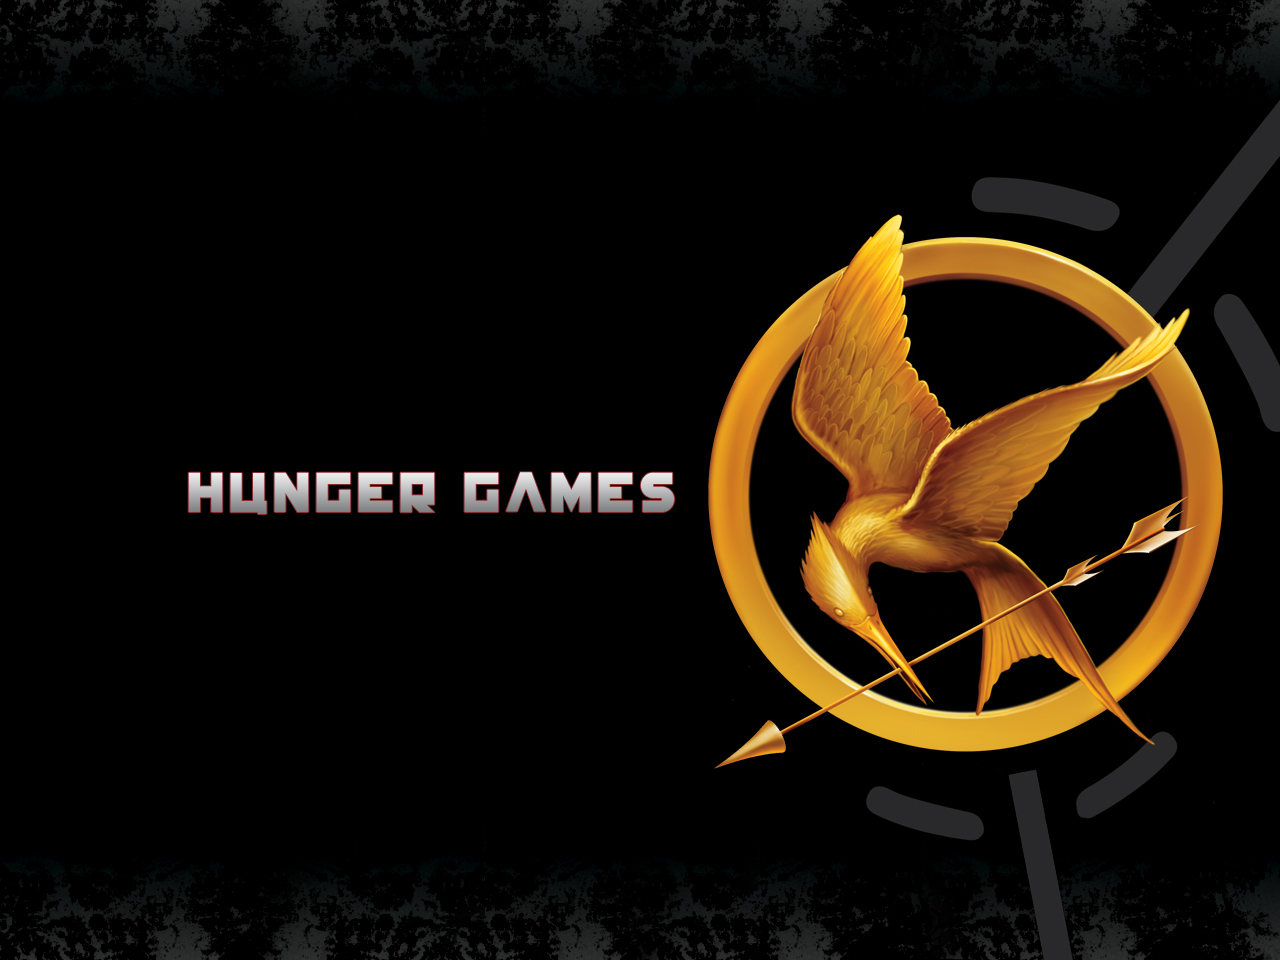 3 Keys to Surviving the Job Hunt from the Hunger Games